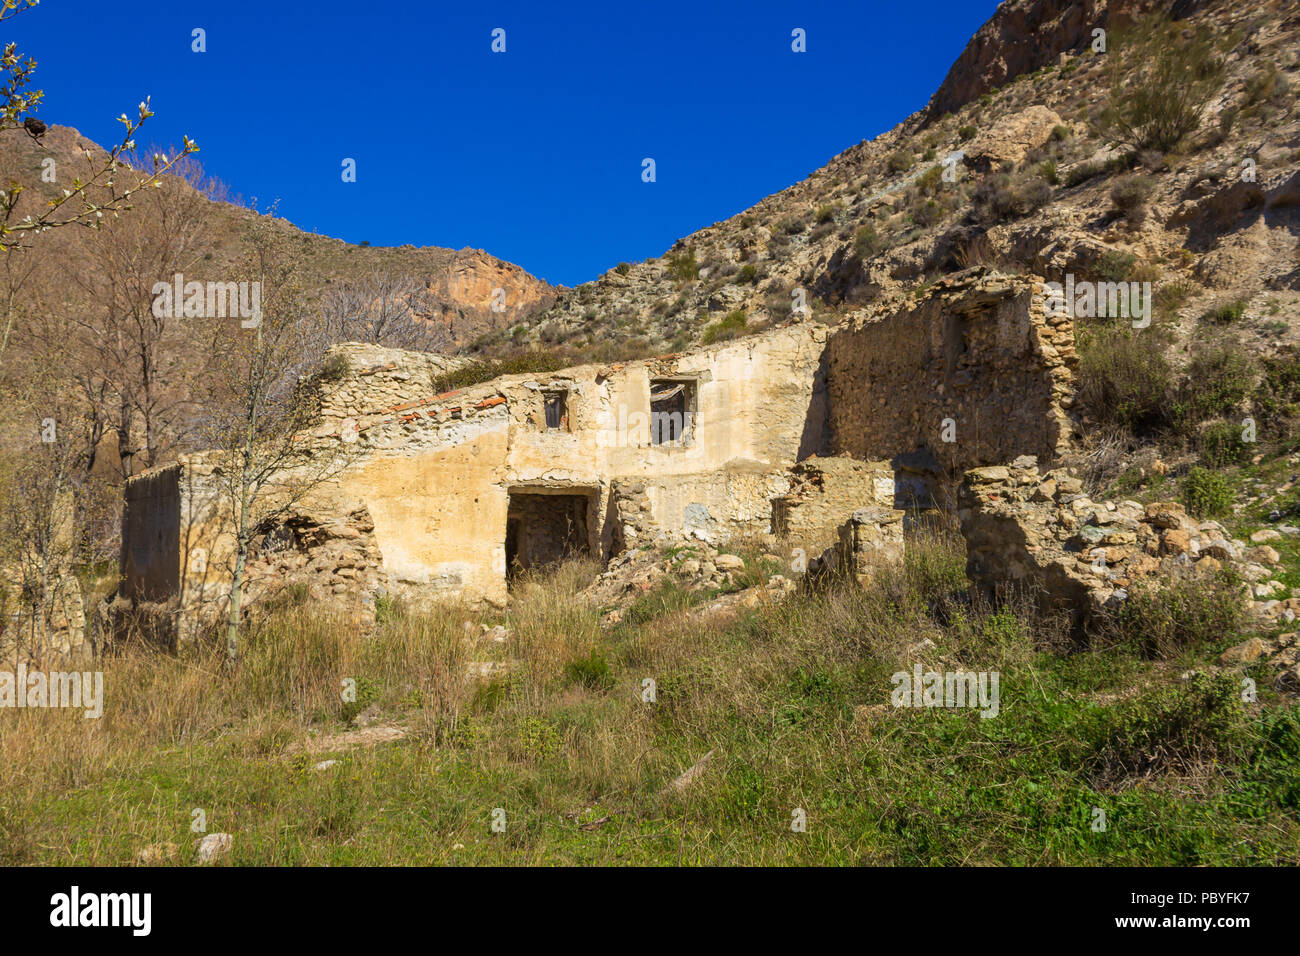 Empty Abandoned House in Rural Spain Stock Photo